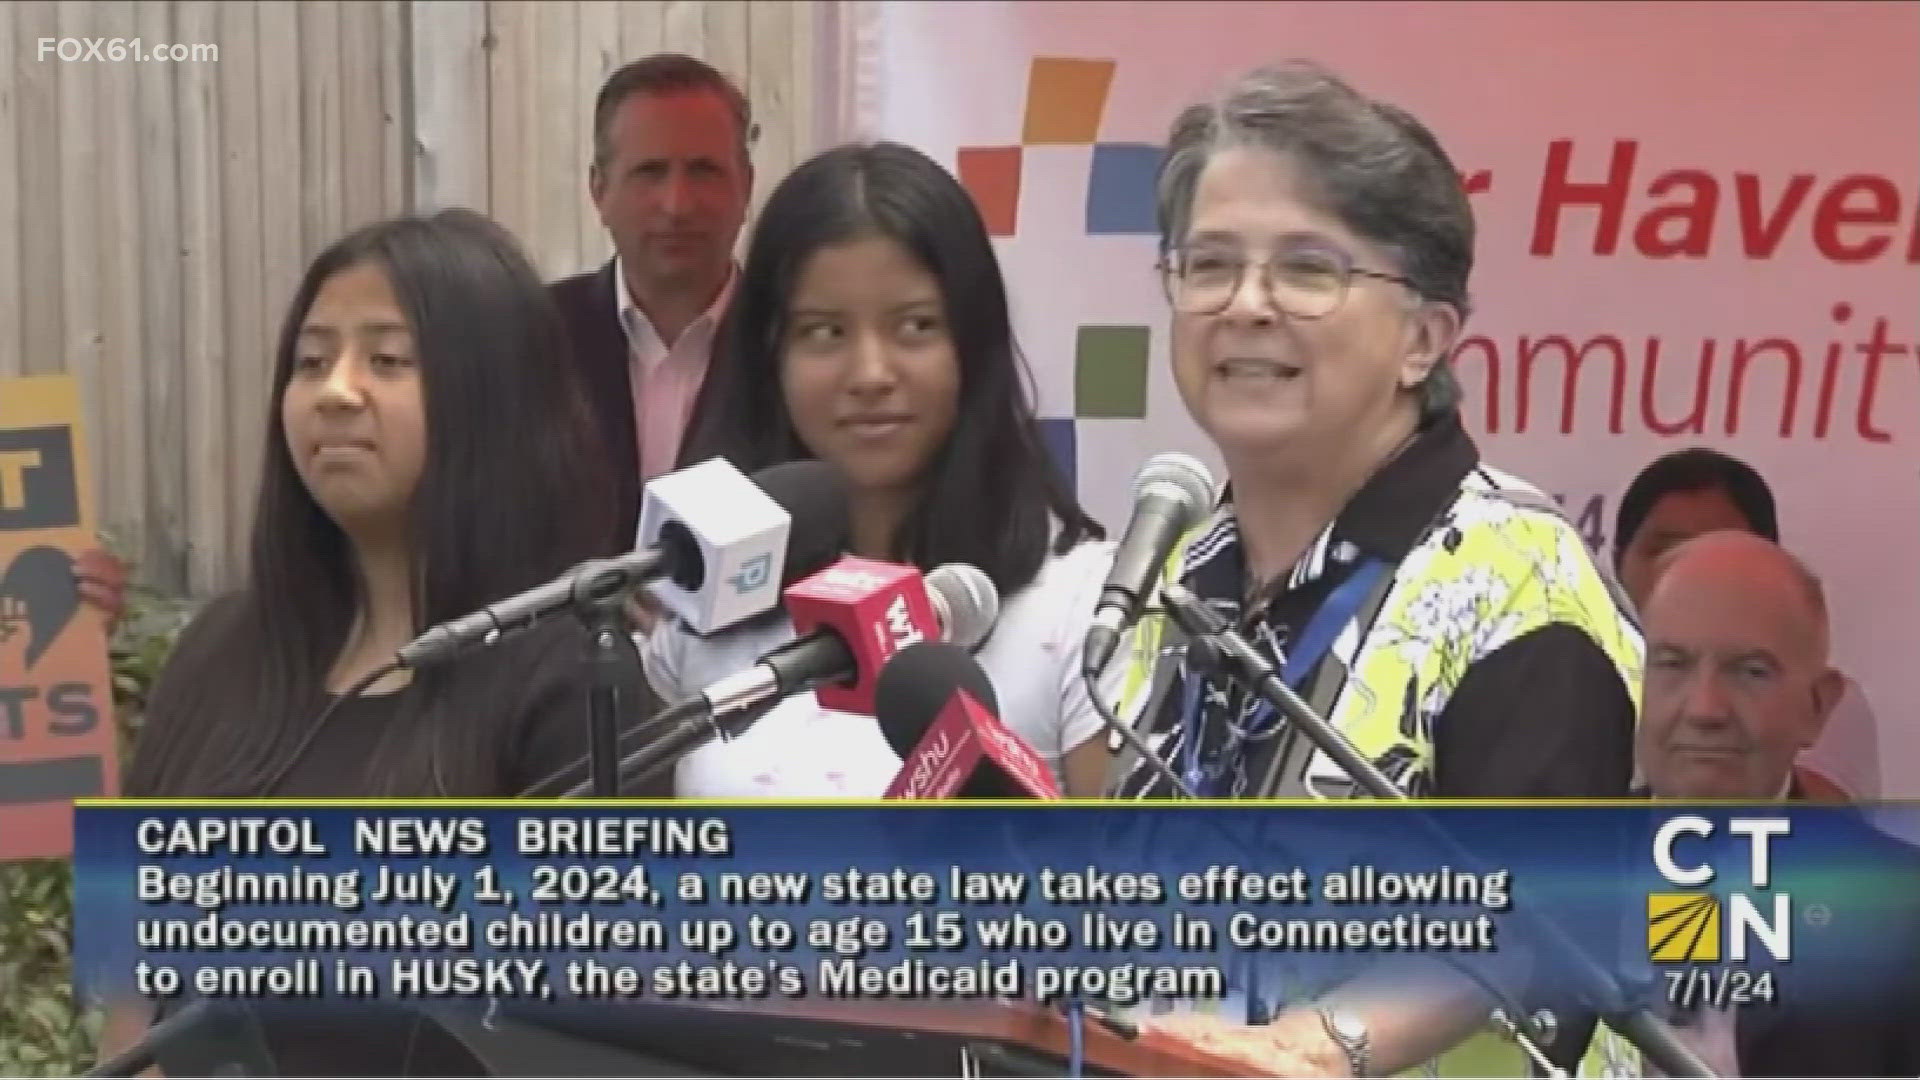 Starting July 1, undocumented children 15 and younger, regardless of immigration status, will now be covered by HUSKY Health, Connecticut's Medicaid program.